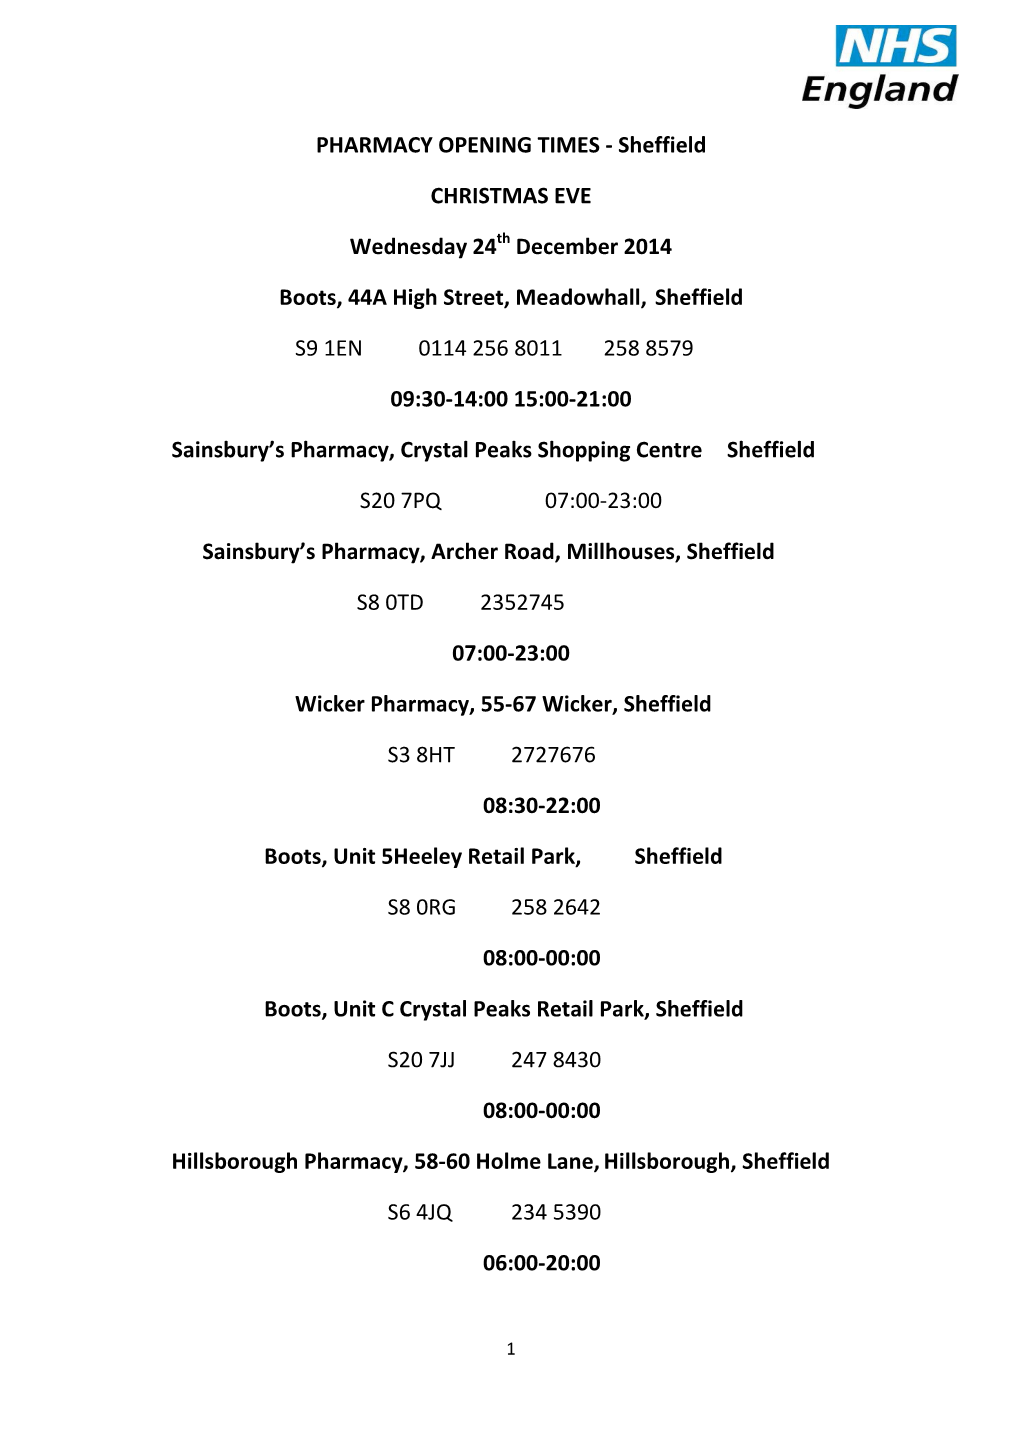 PHARMACY OPENING TIMES - Sheffield